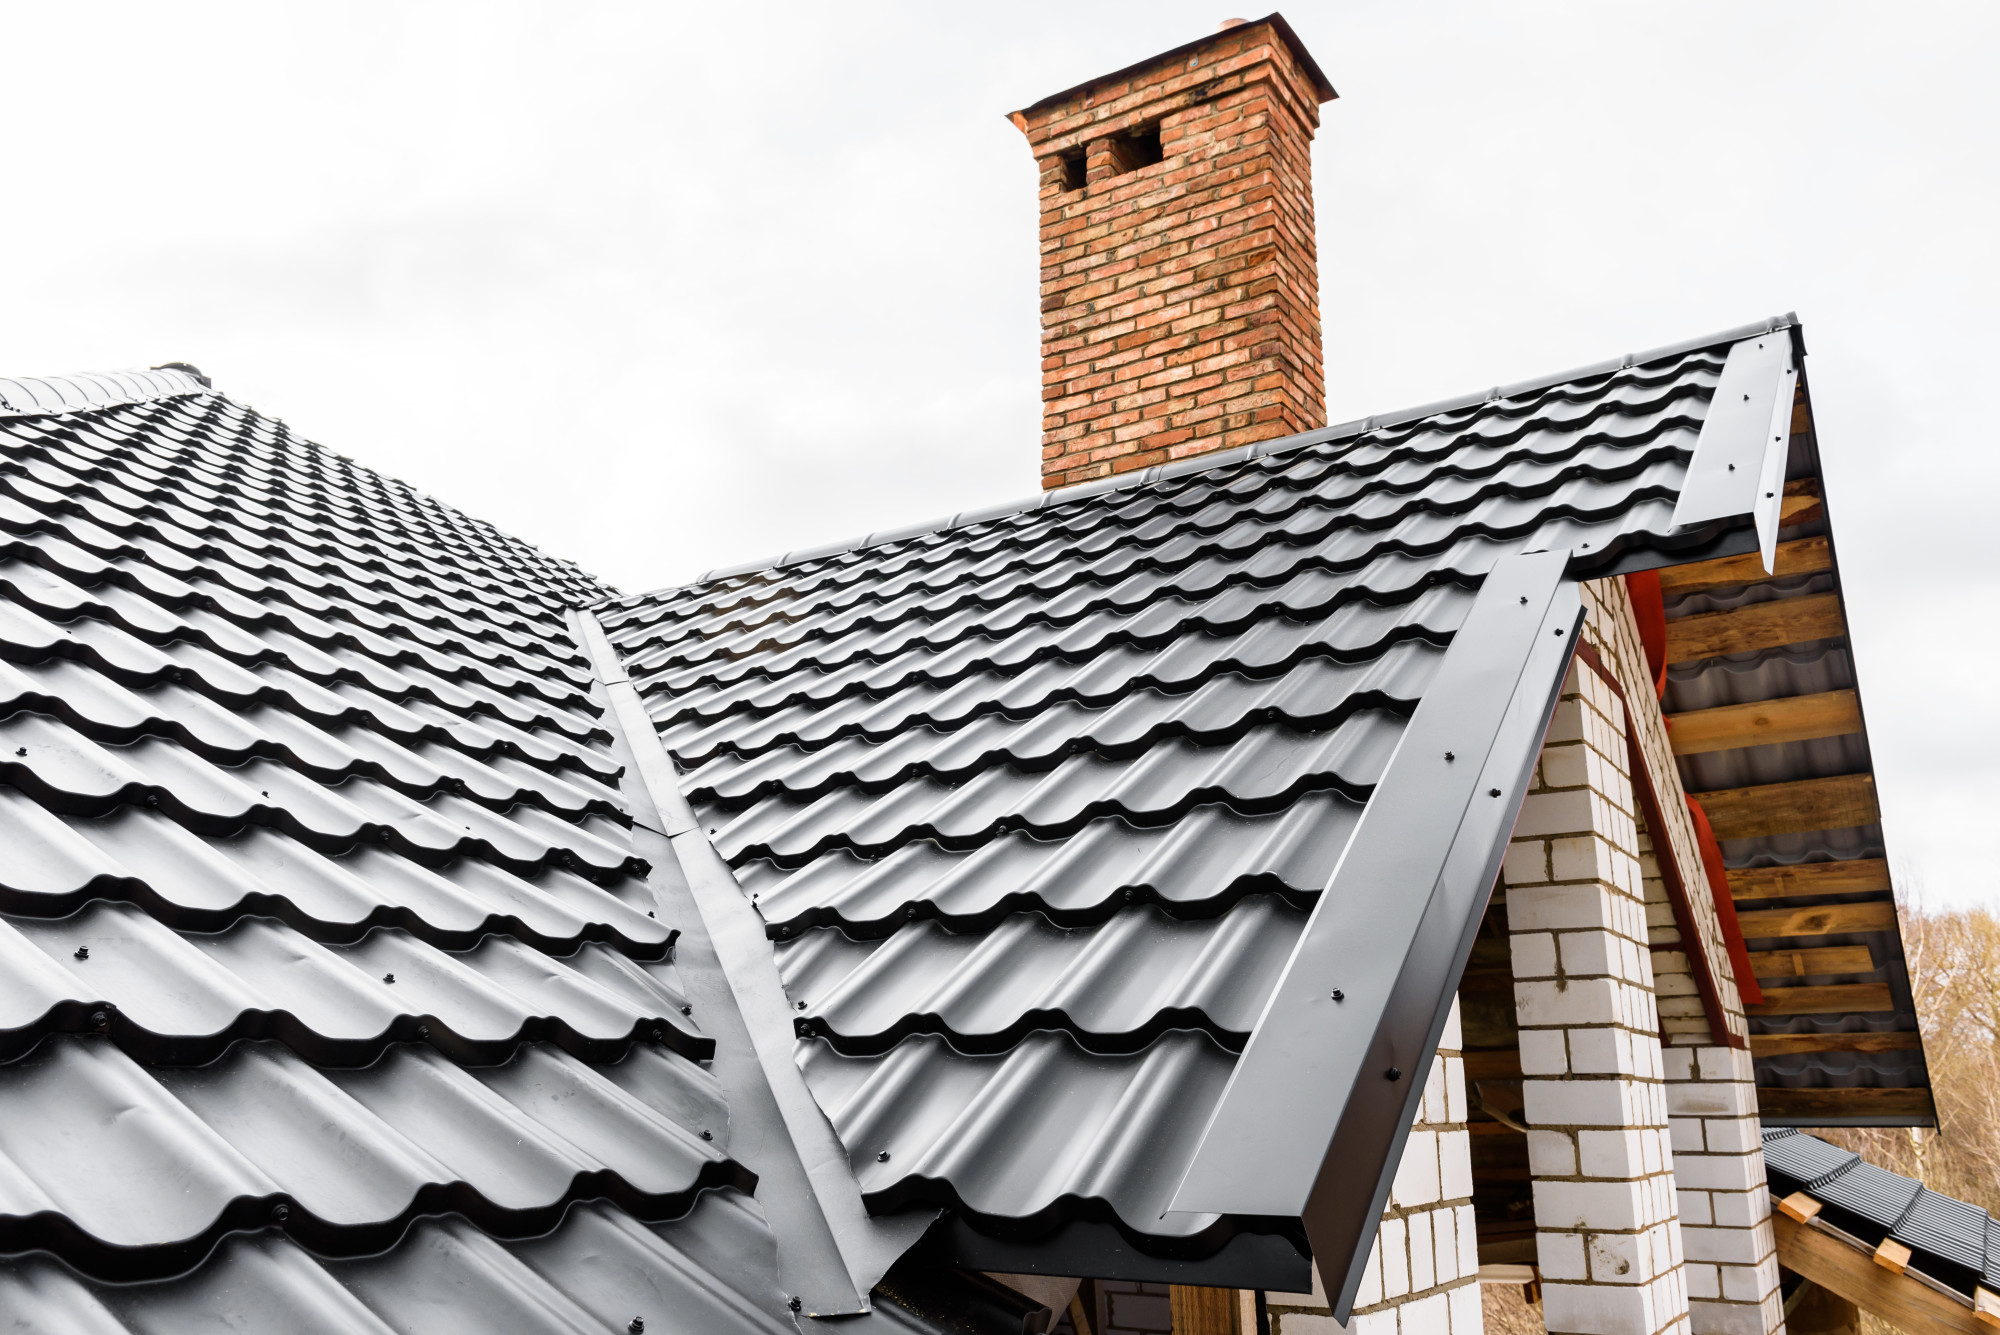 Metal Roof vs. Tile Roof: What Are the Differences?